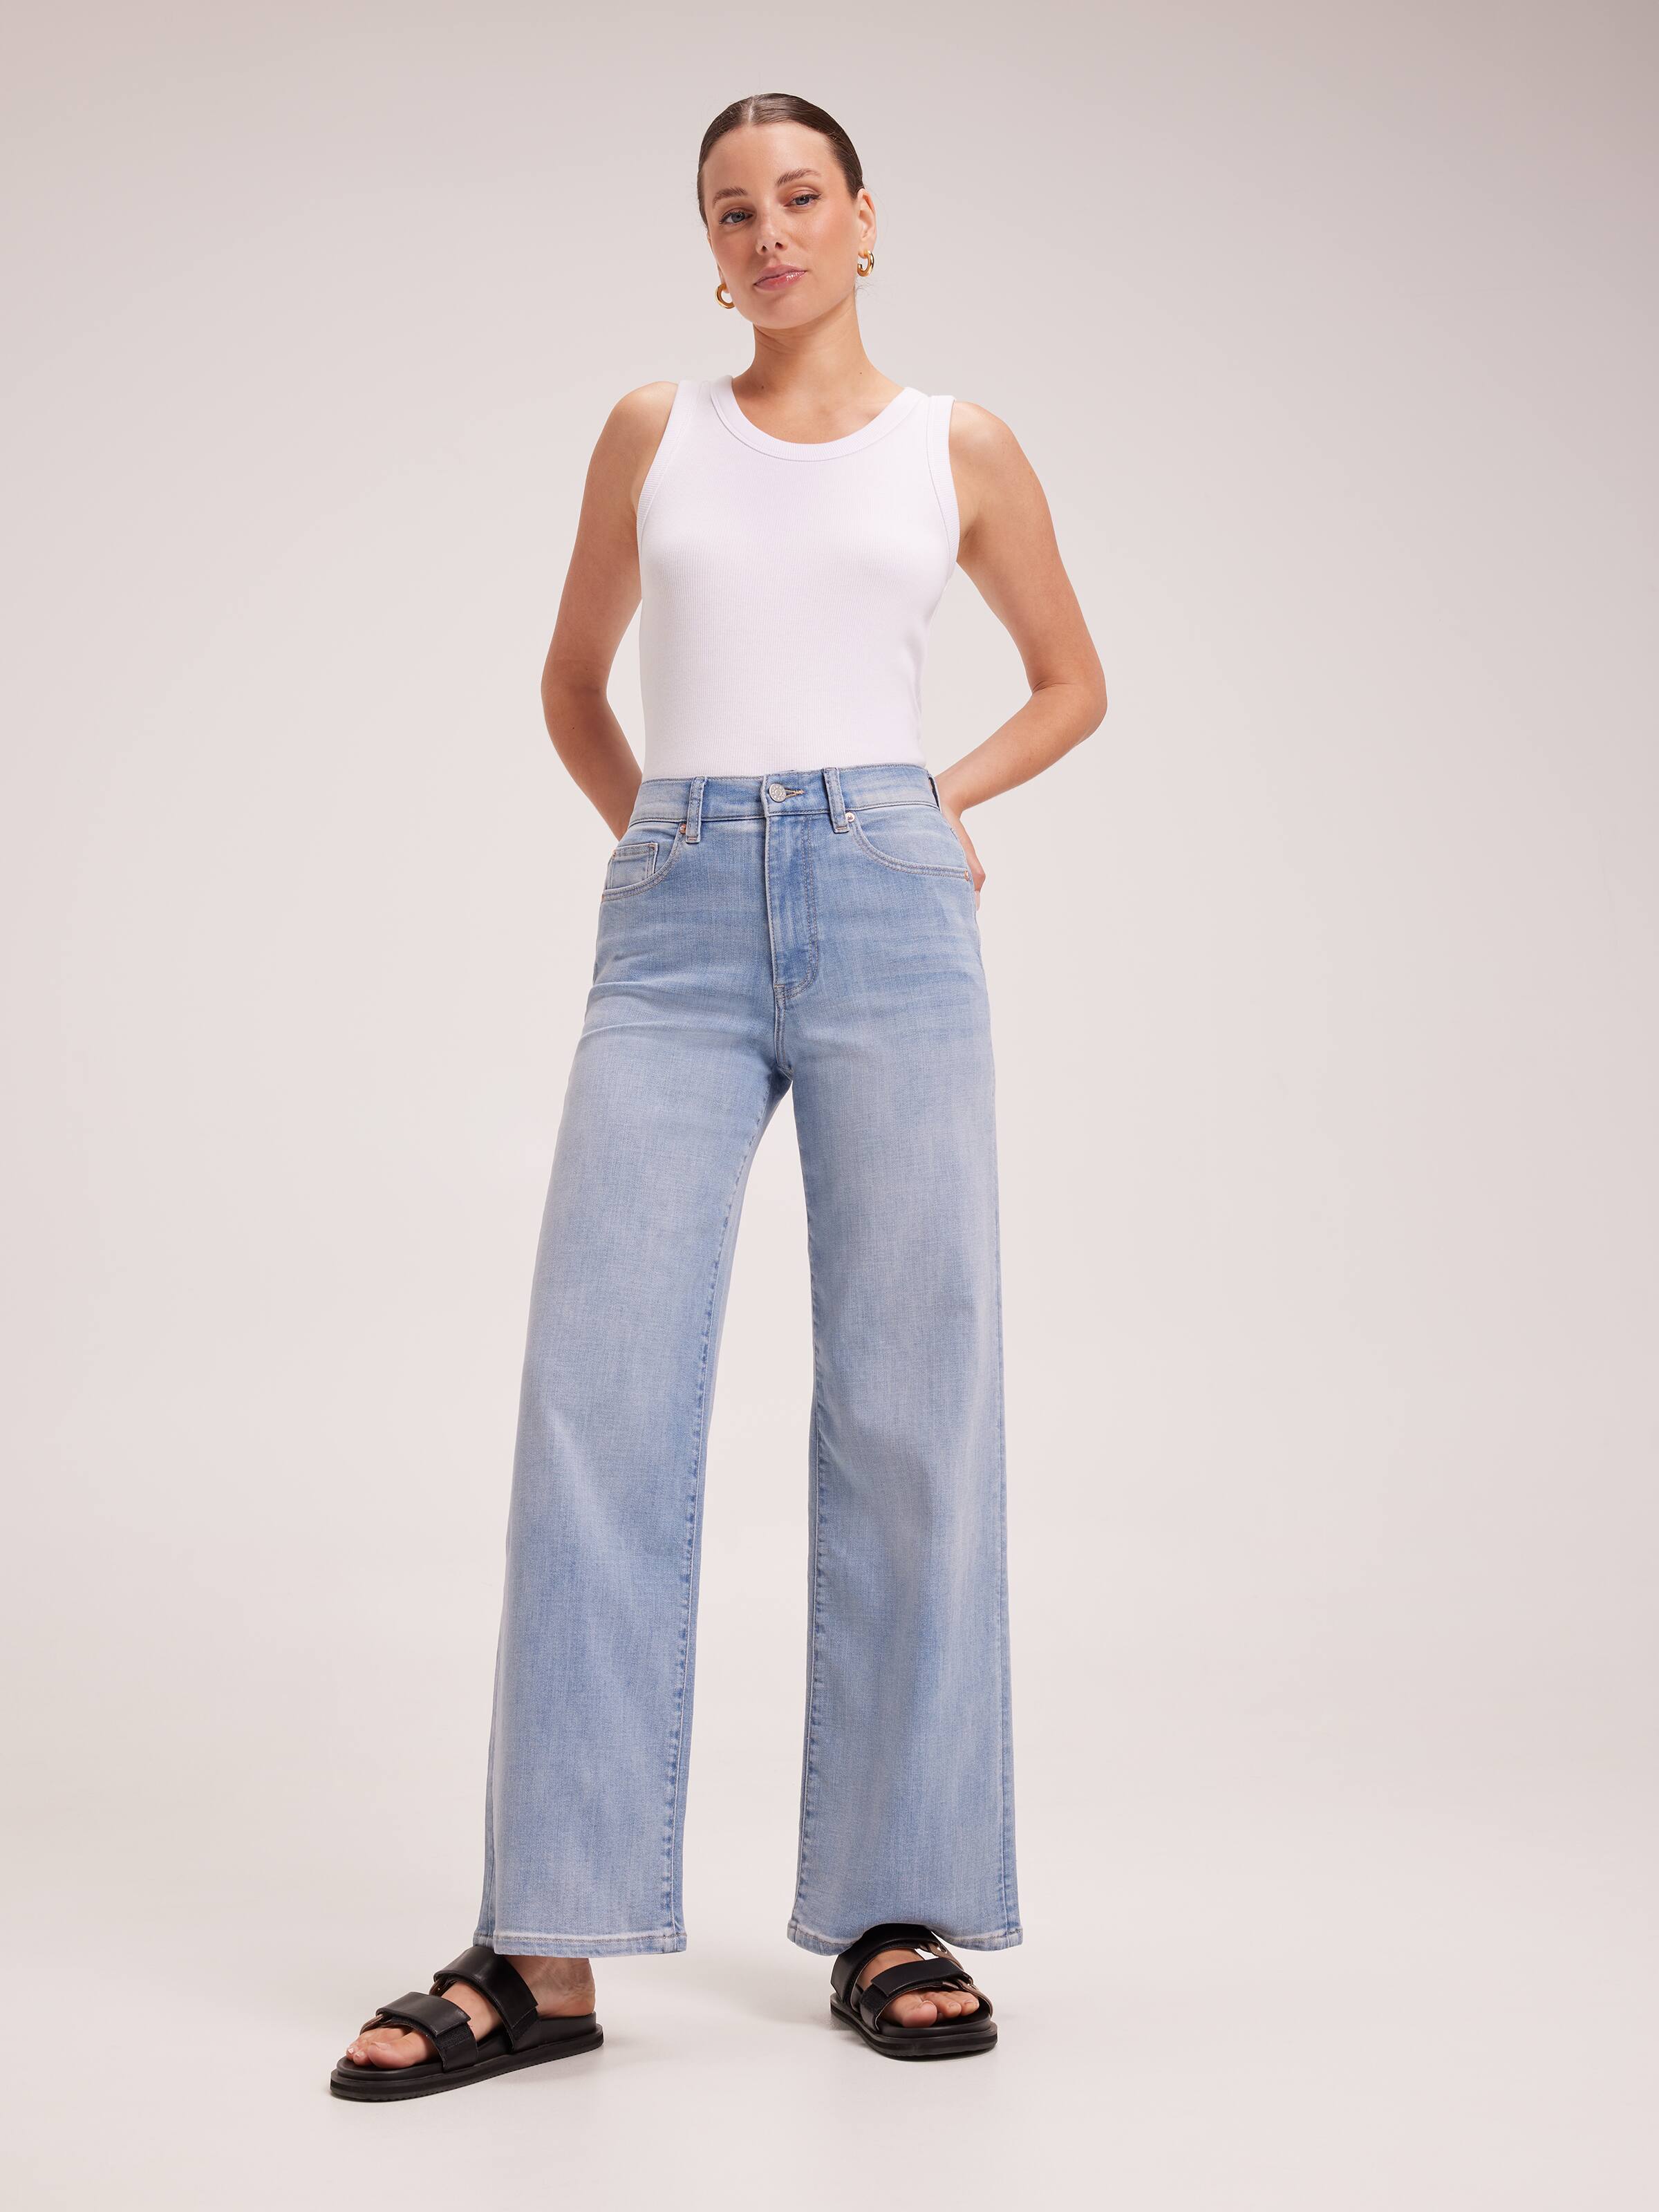 Womens Casual Dress Pants Wide Leg Jeans For Women High Waisted Baggy Seamed  Front Wide Leg Jeans Comfy Work 